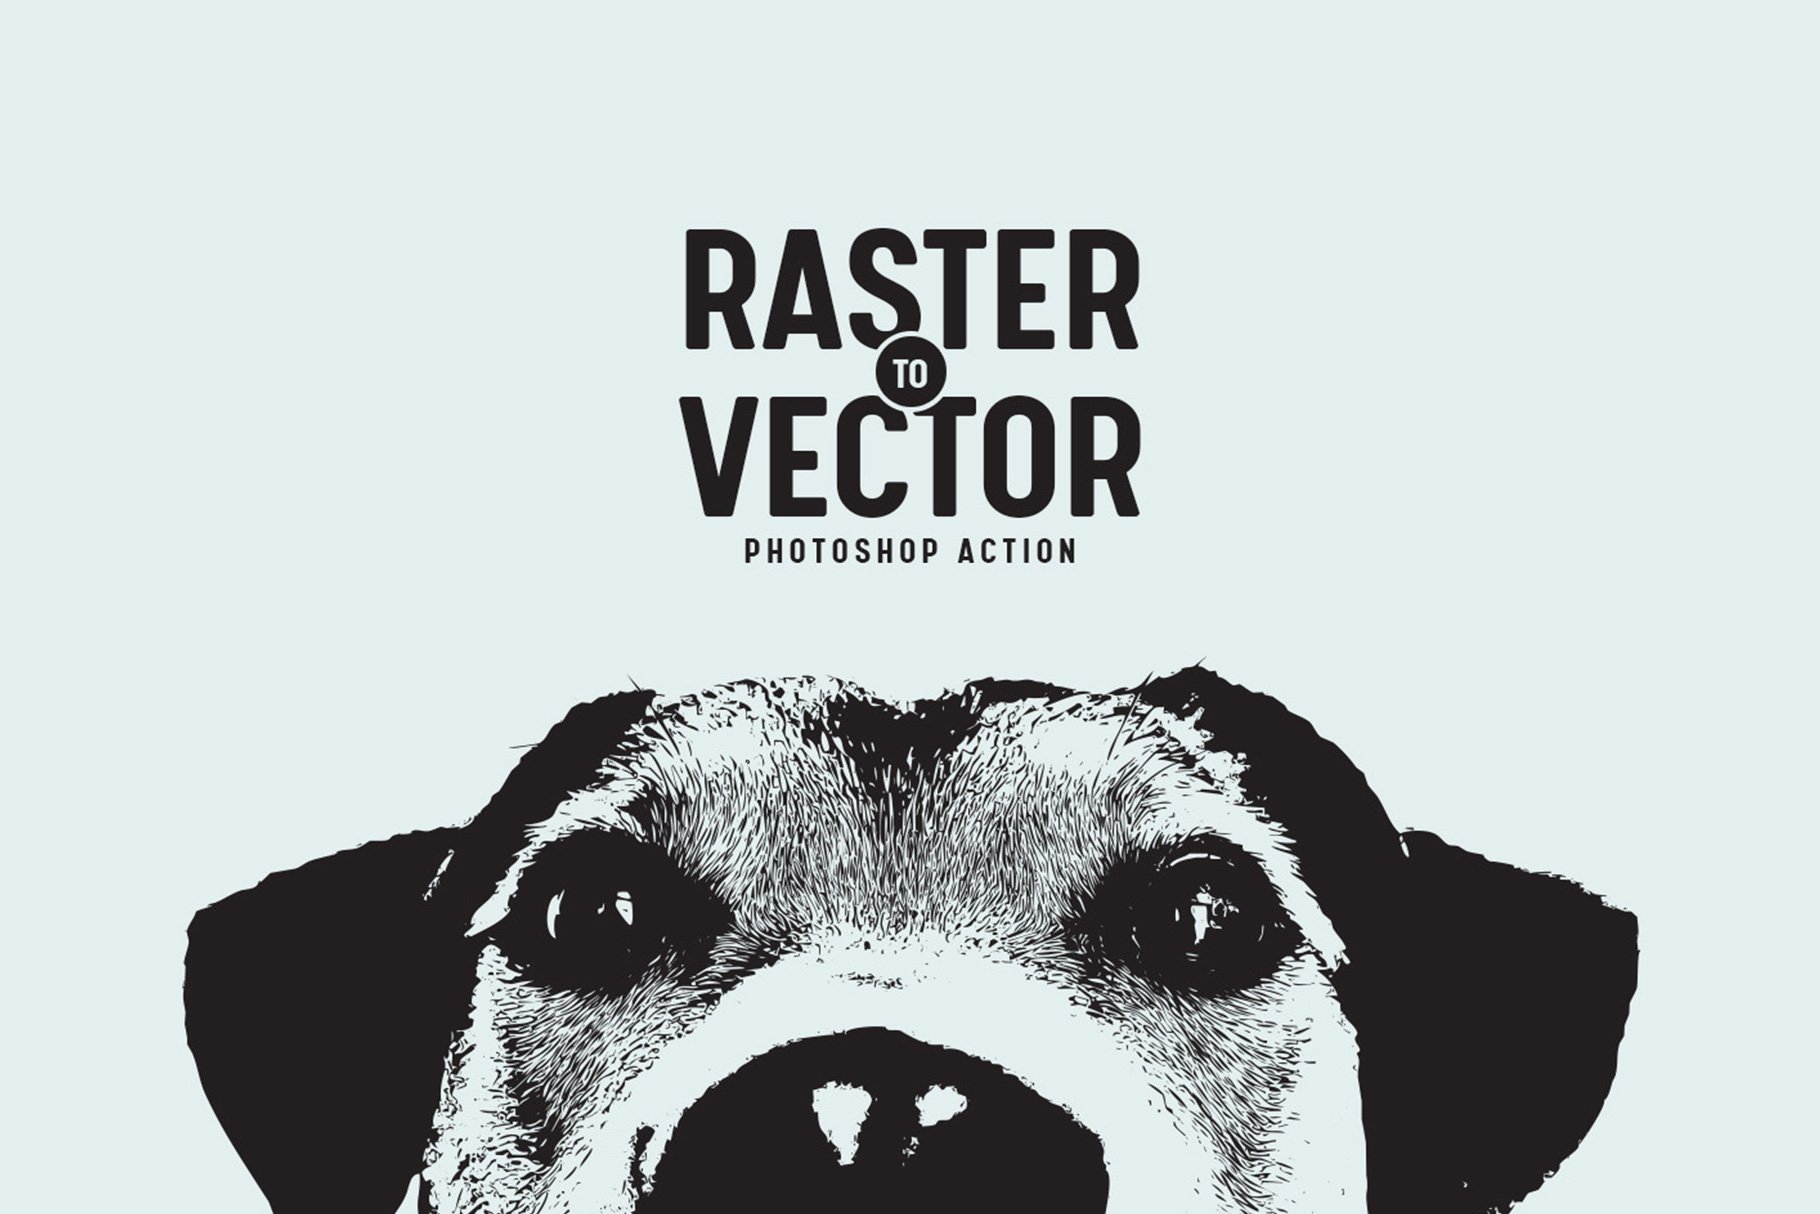 Raster to Vector Photoshop Actioncover image.